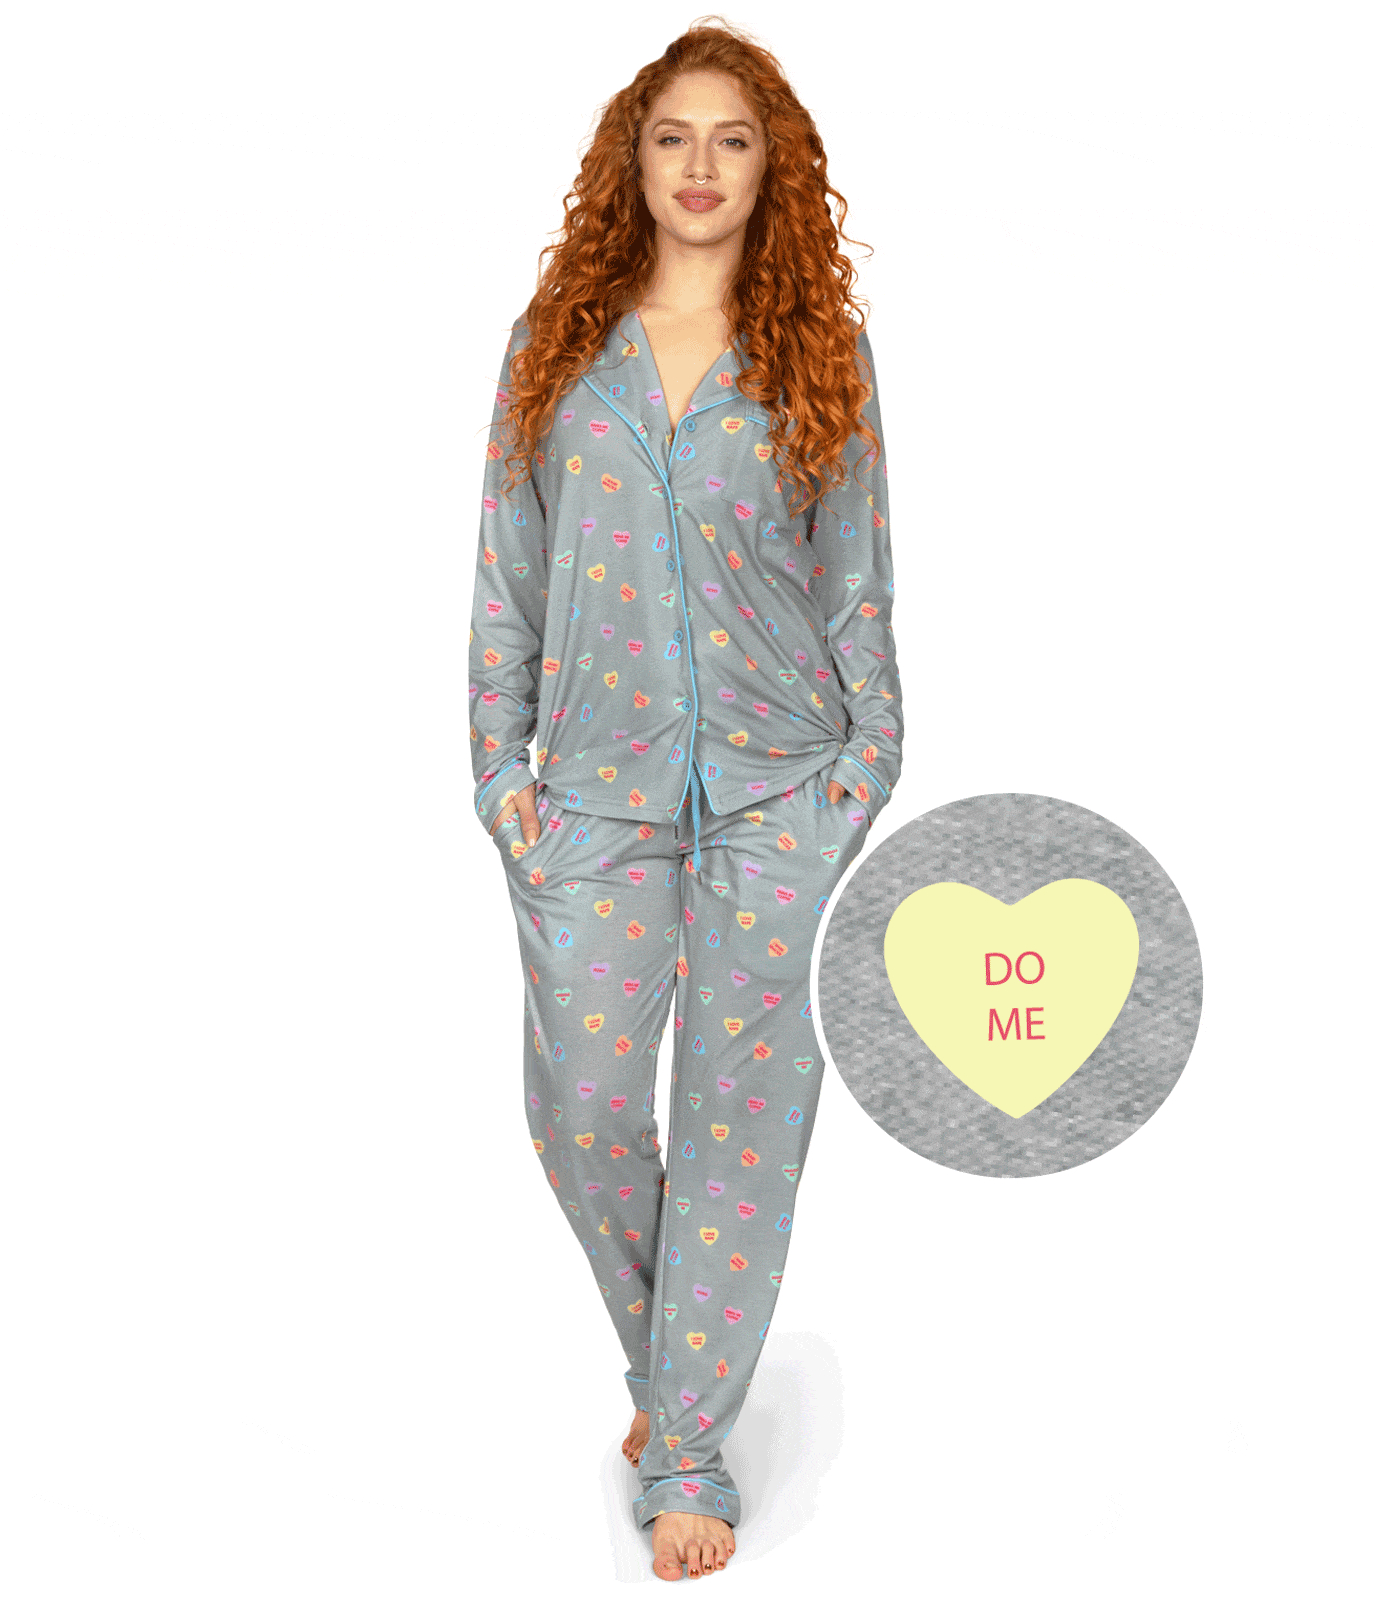 Candy Hearts Pajama Set: Women's Valentine's Outfits